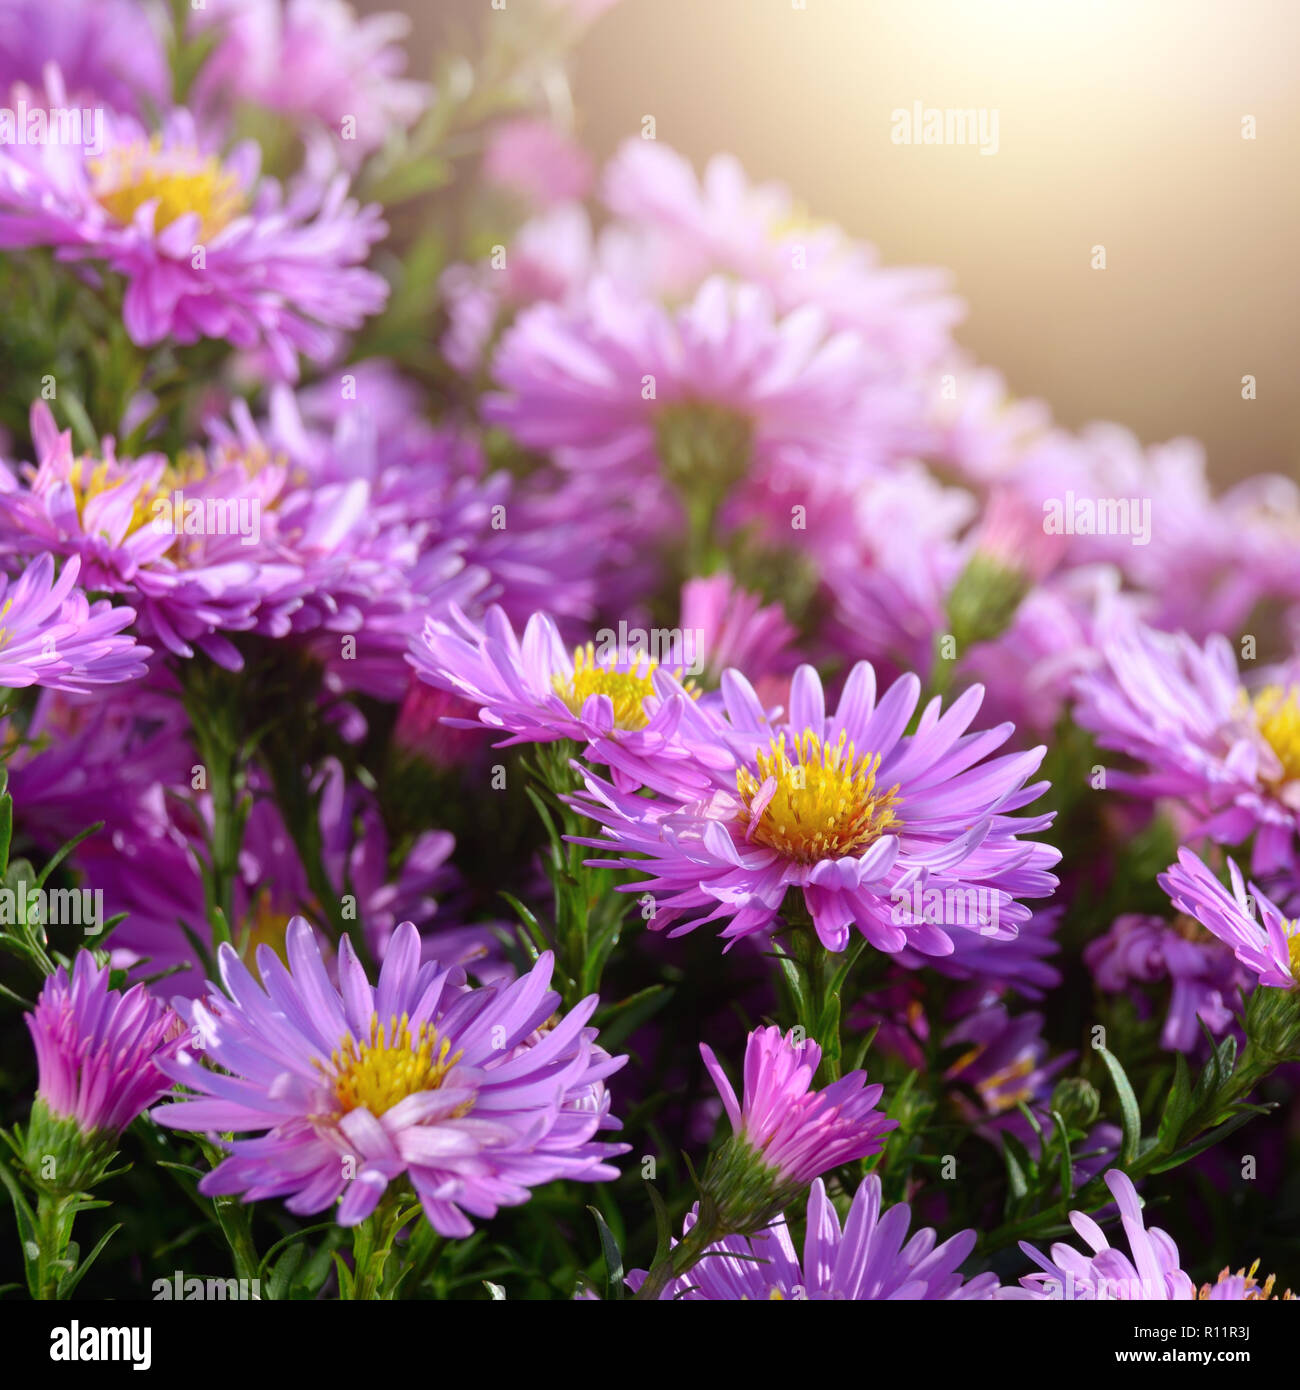 Violet asters flowers autumn background Stock Photo